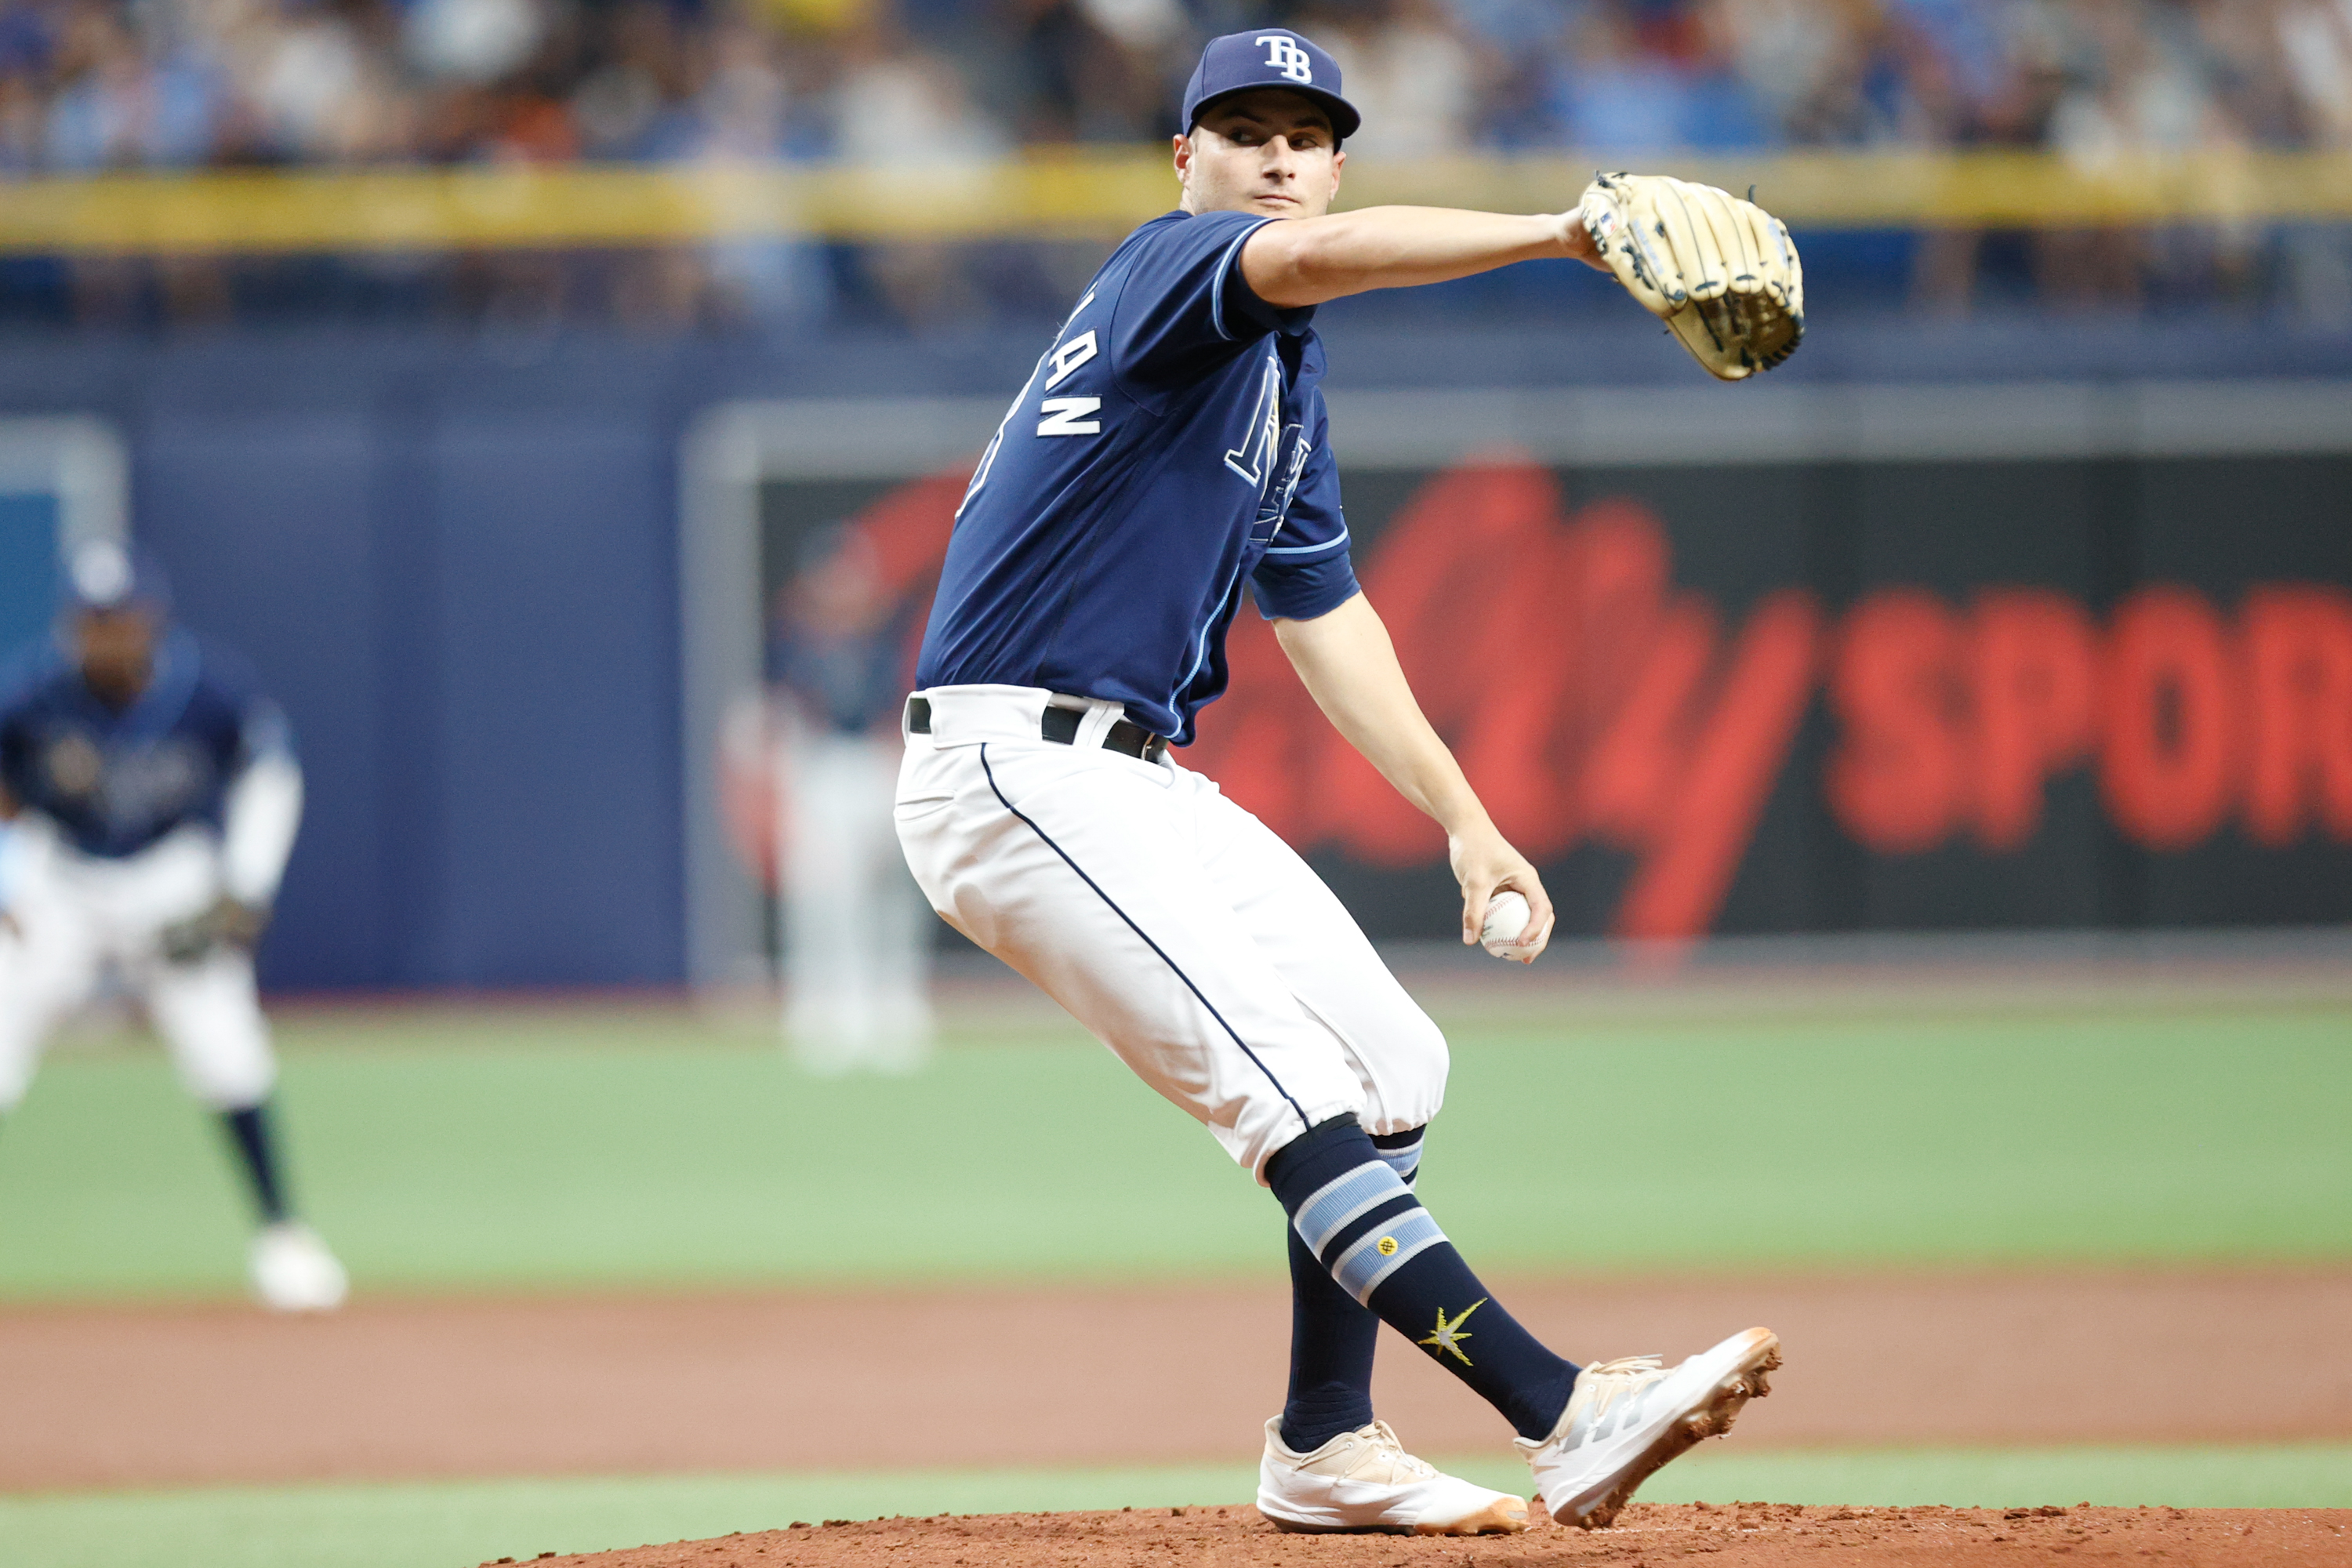 Rays' and USF alum McClanahan to start 2022 MLB All-Star Game